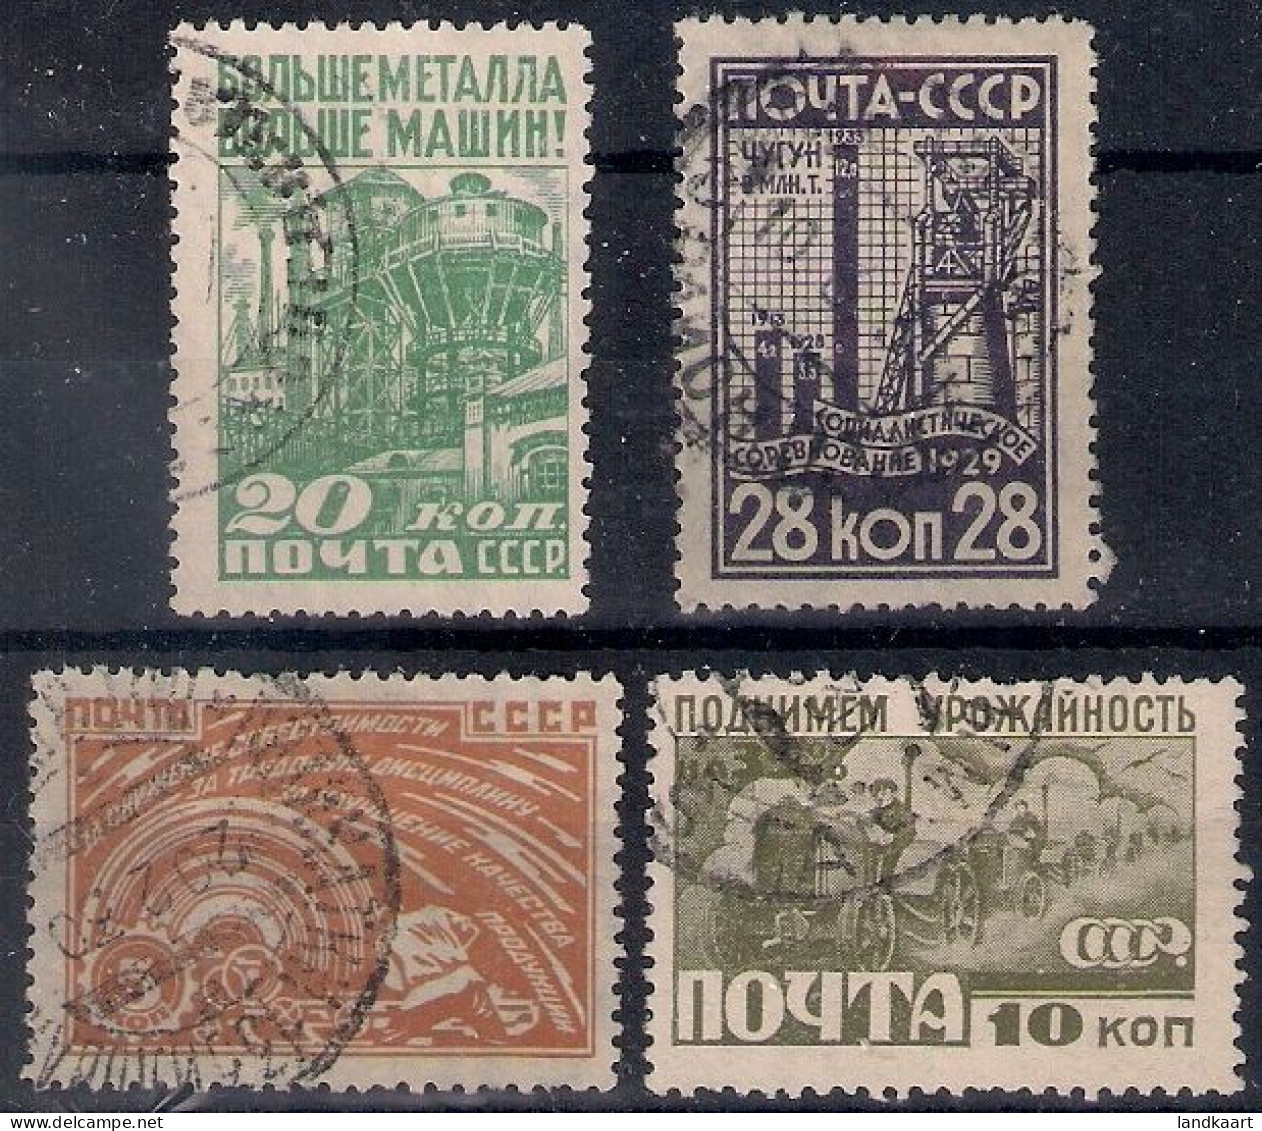 Russia 1929, Michel Nr 379-82, Used - Usados